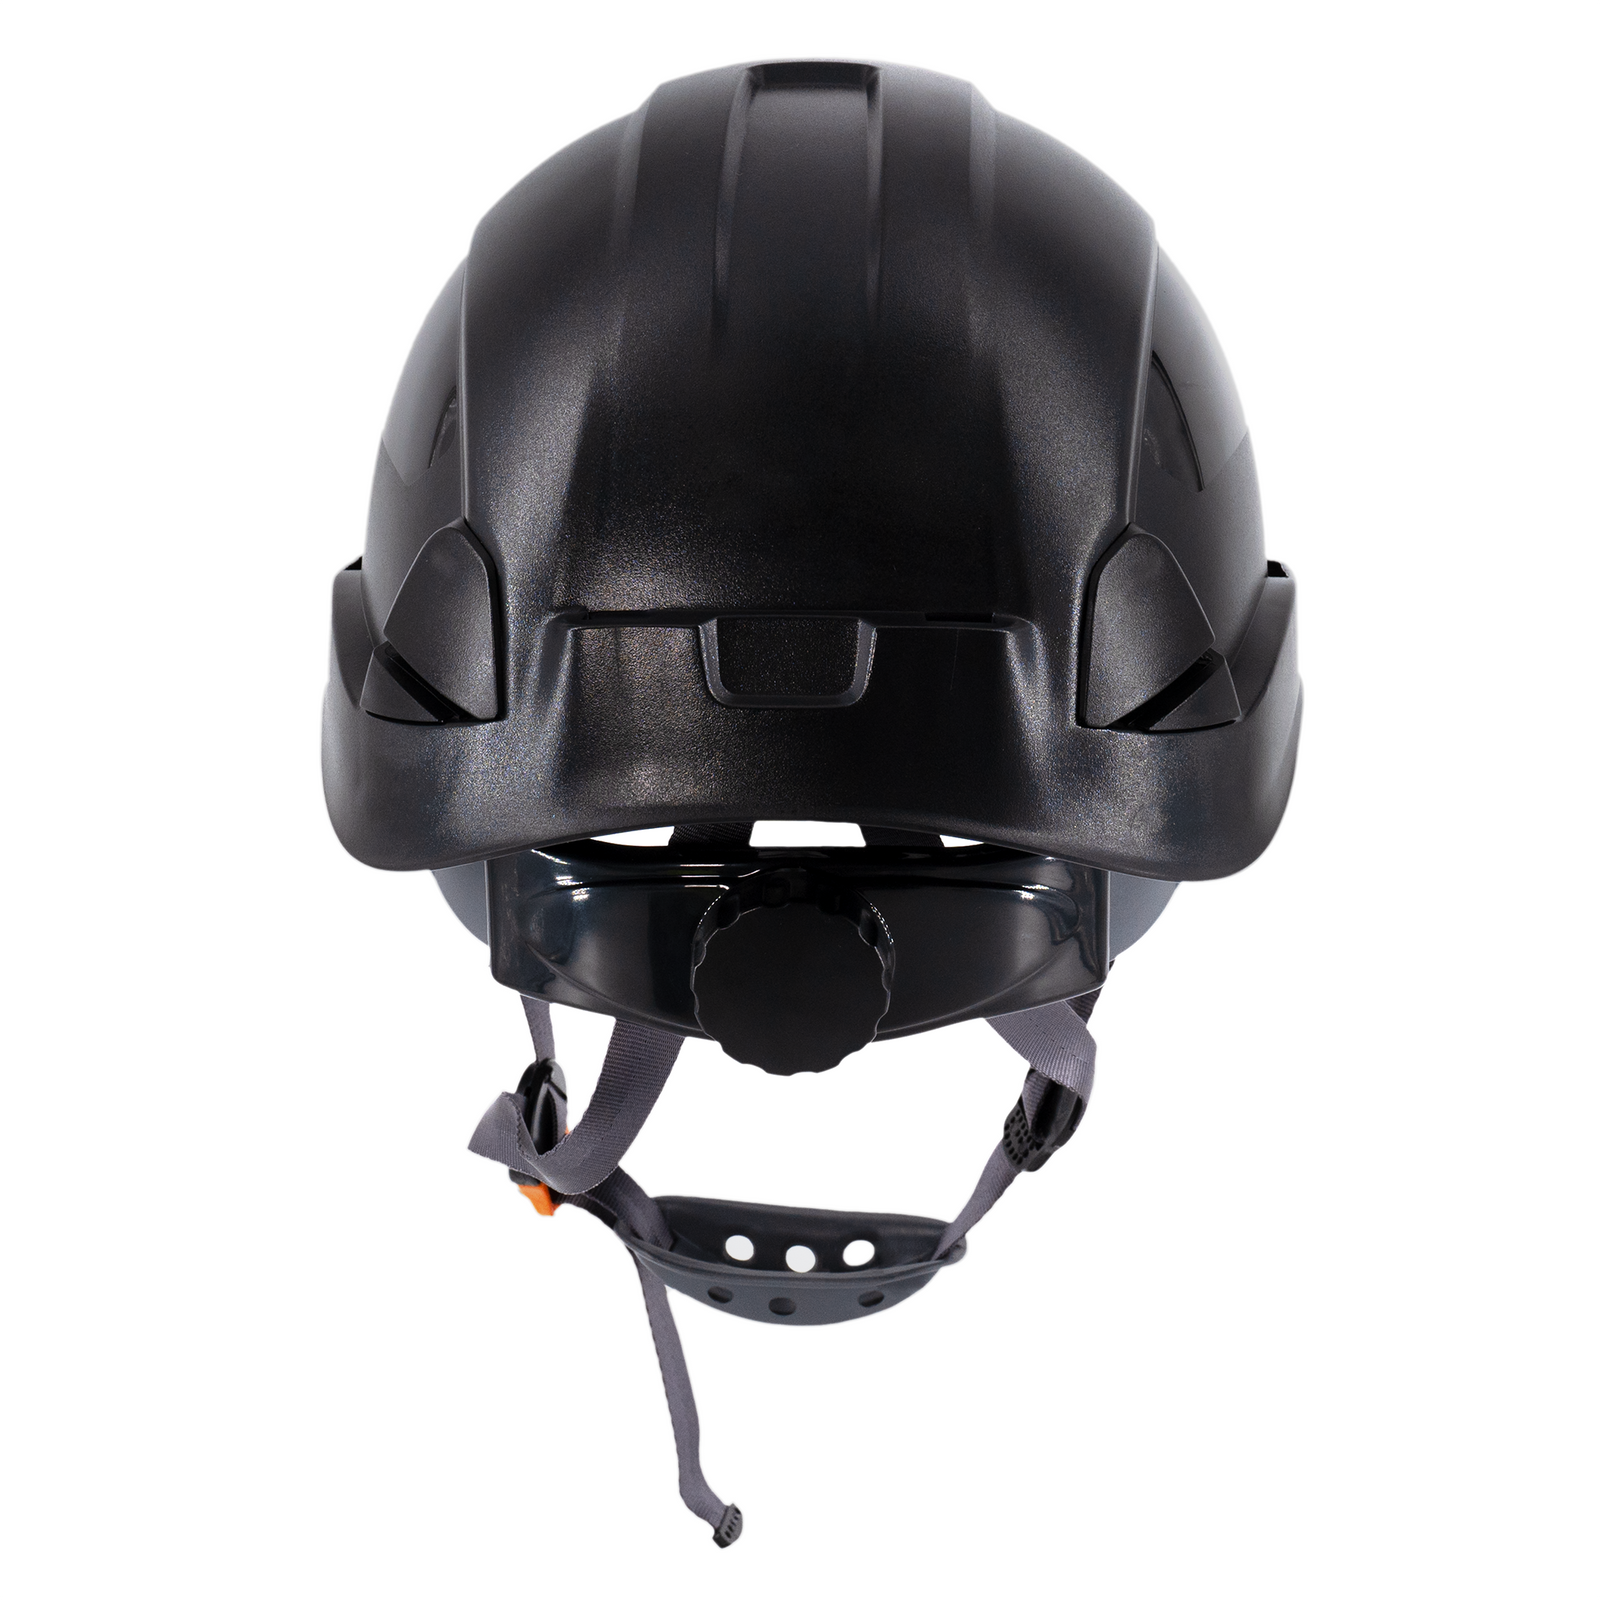 Black rescue helmet with adjustable 6 point suspension and chin strap, ANSI Z89.1-14 and Type I Class C, E, G